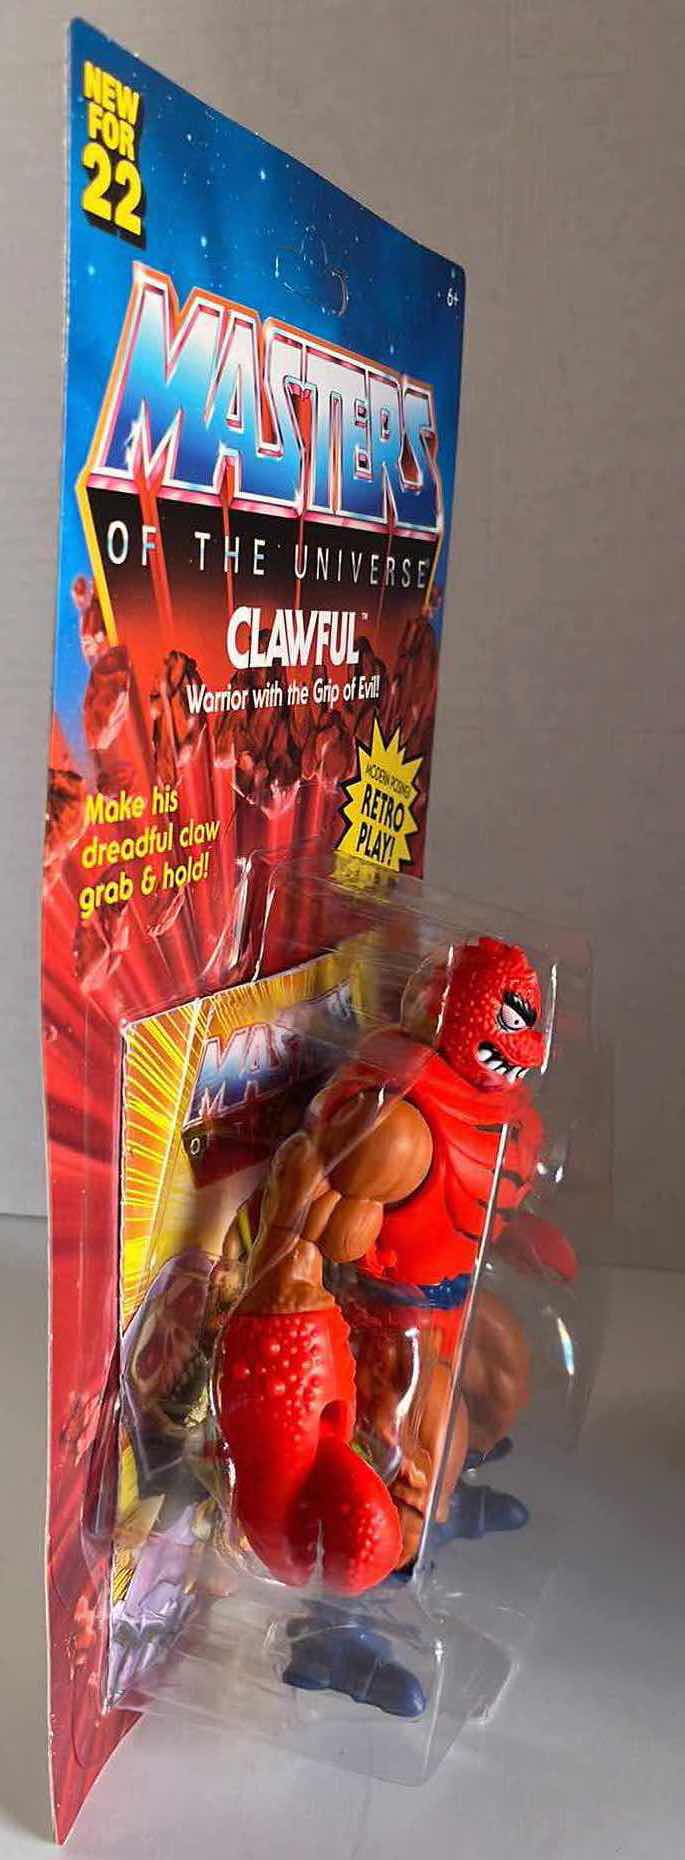 Photo 2 of NEW MATTEL MASTERS OF THE UNIVERSE ACTION FIGURE & ACCESSORIES, CLAWFUL WARRIOR WITH THE GRIP OF EVIL (1)